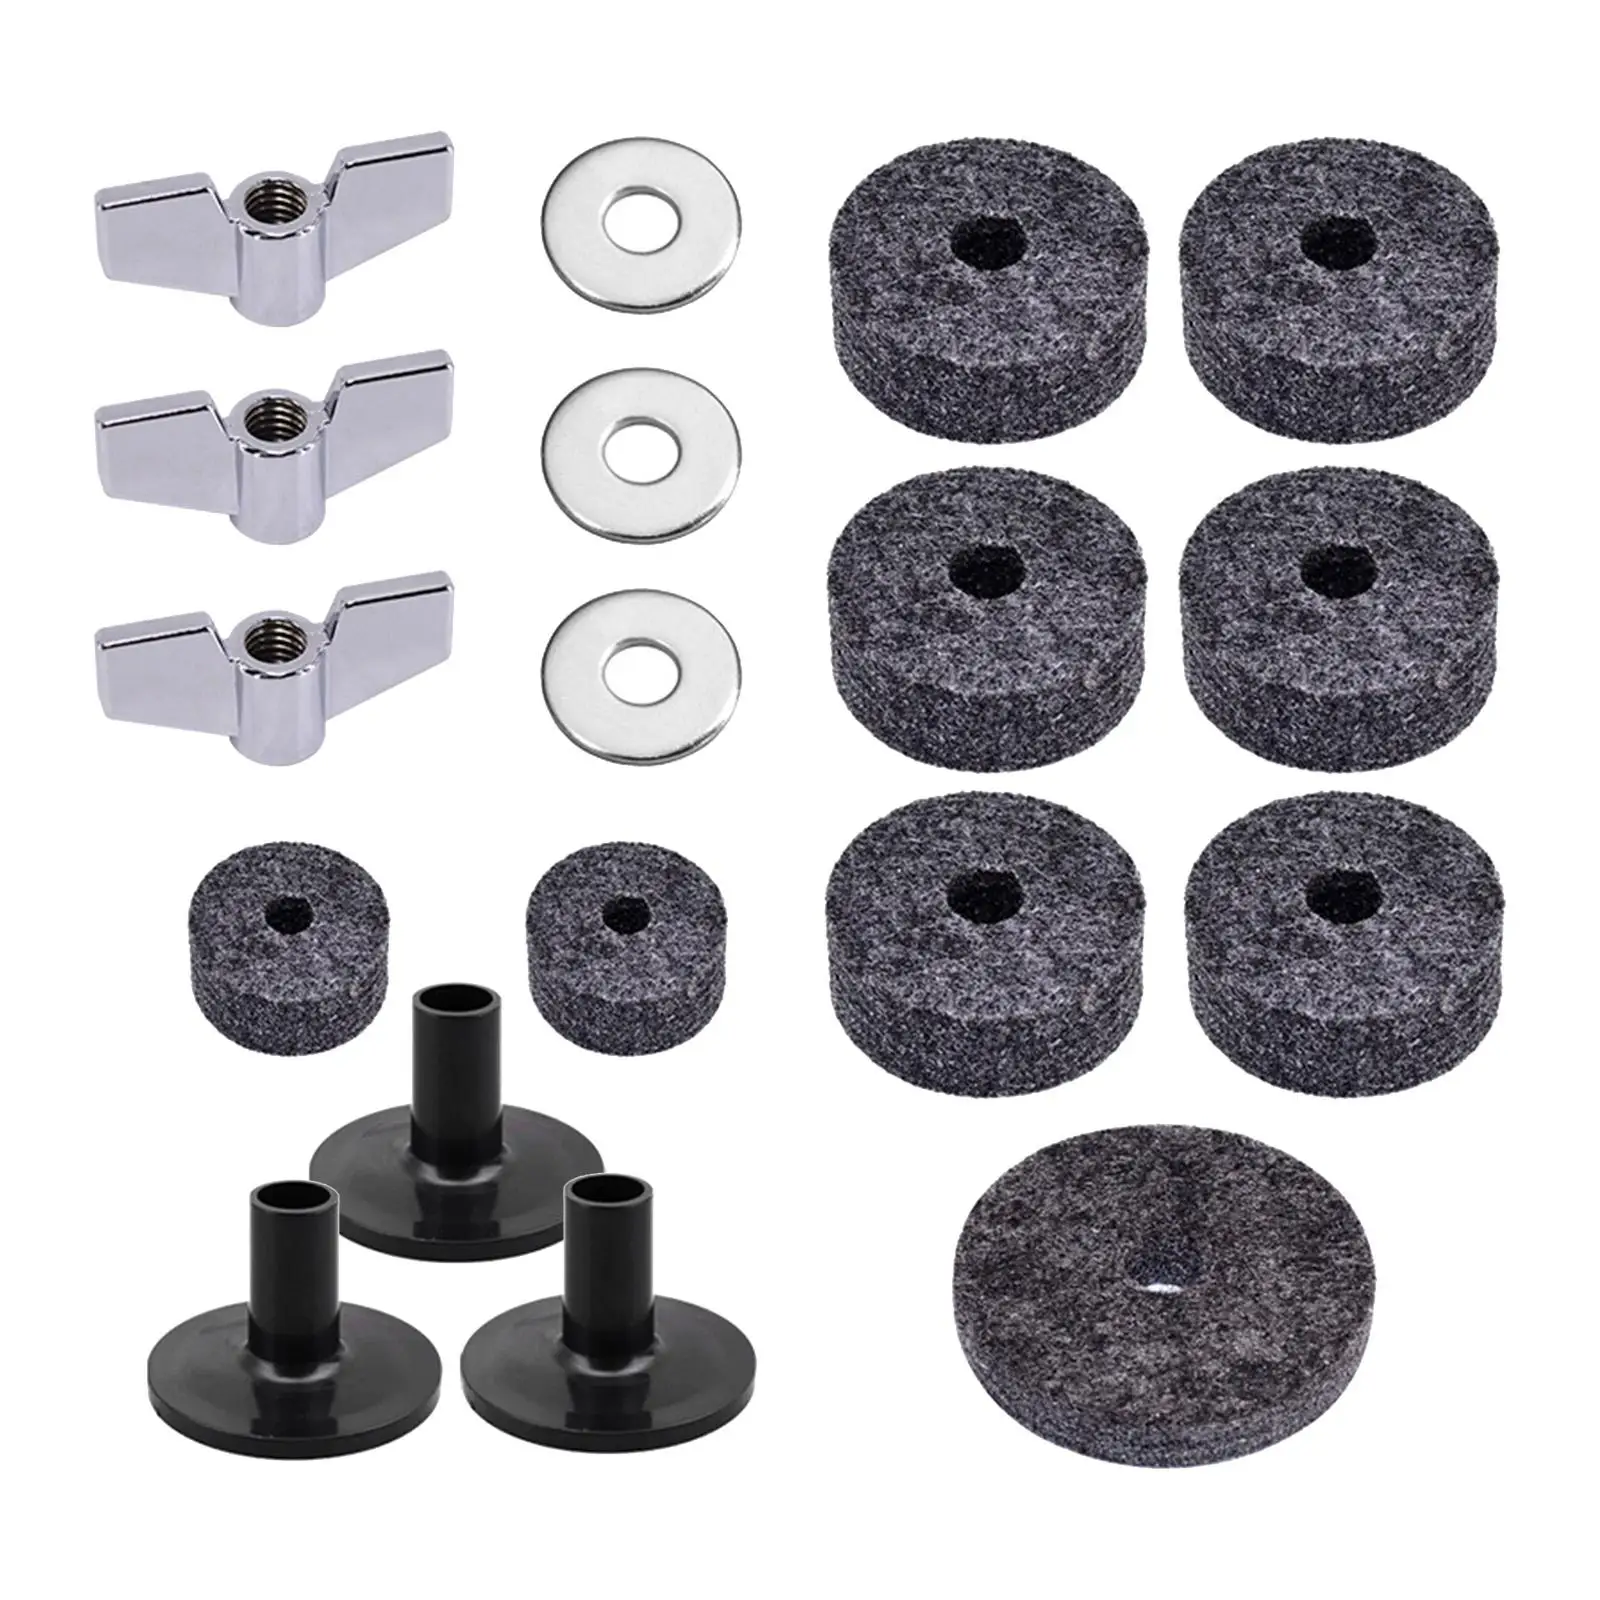 Drum Spare Parts, Cymbal Felt Washer Cymbal Replacement, Musical Accessories,